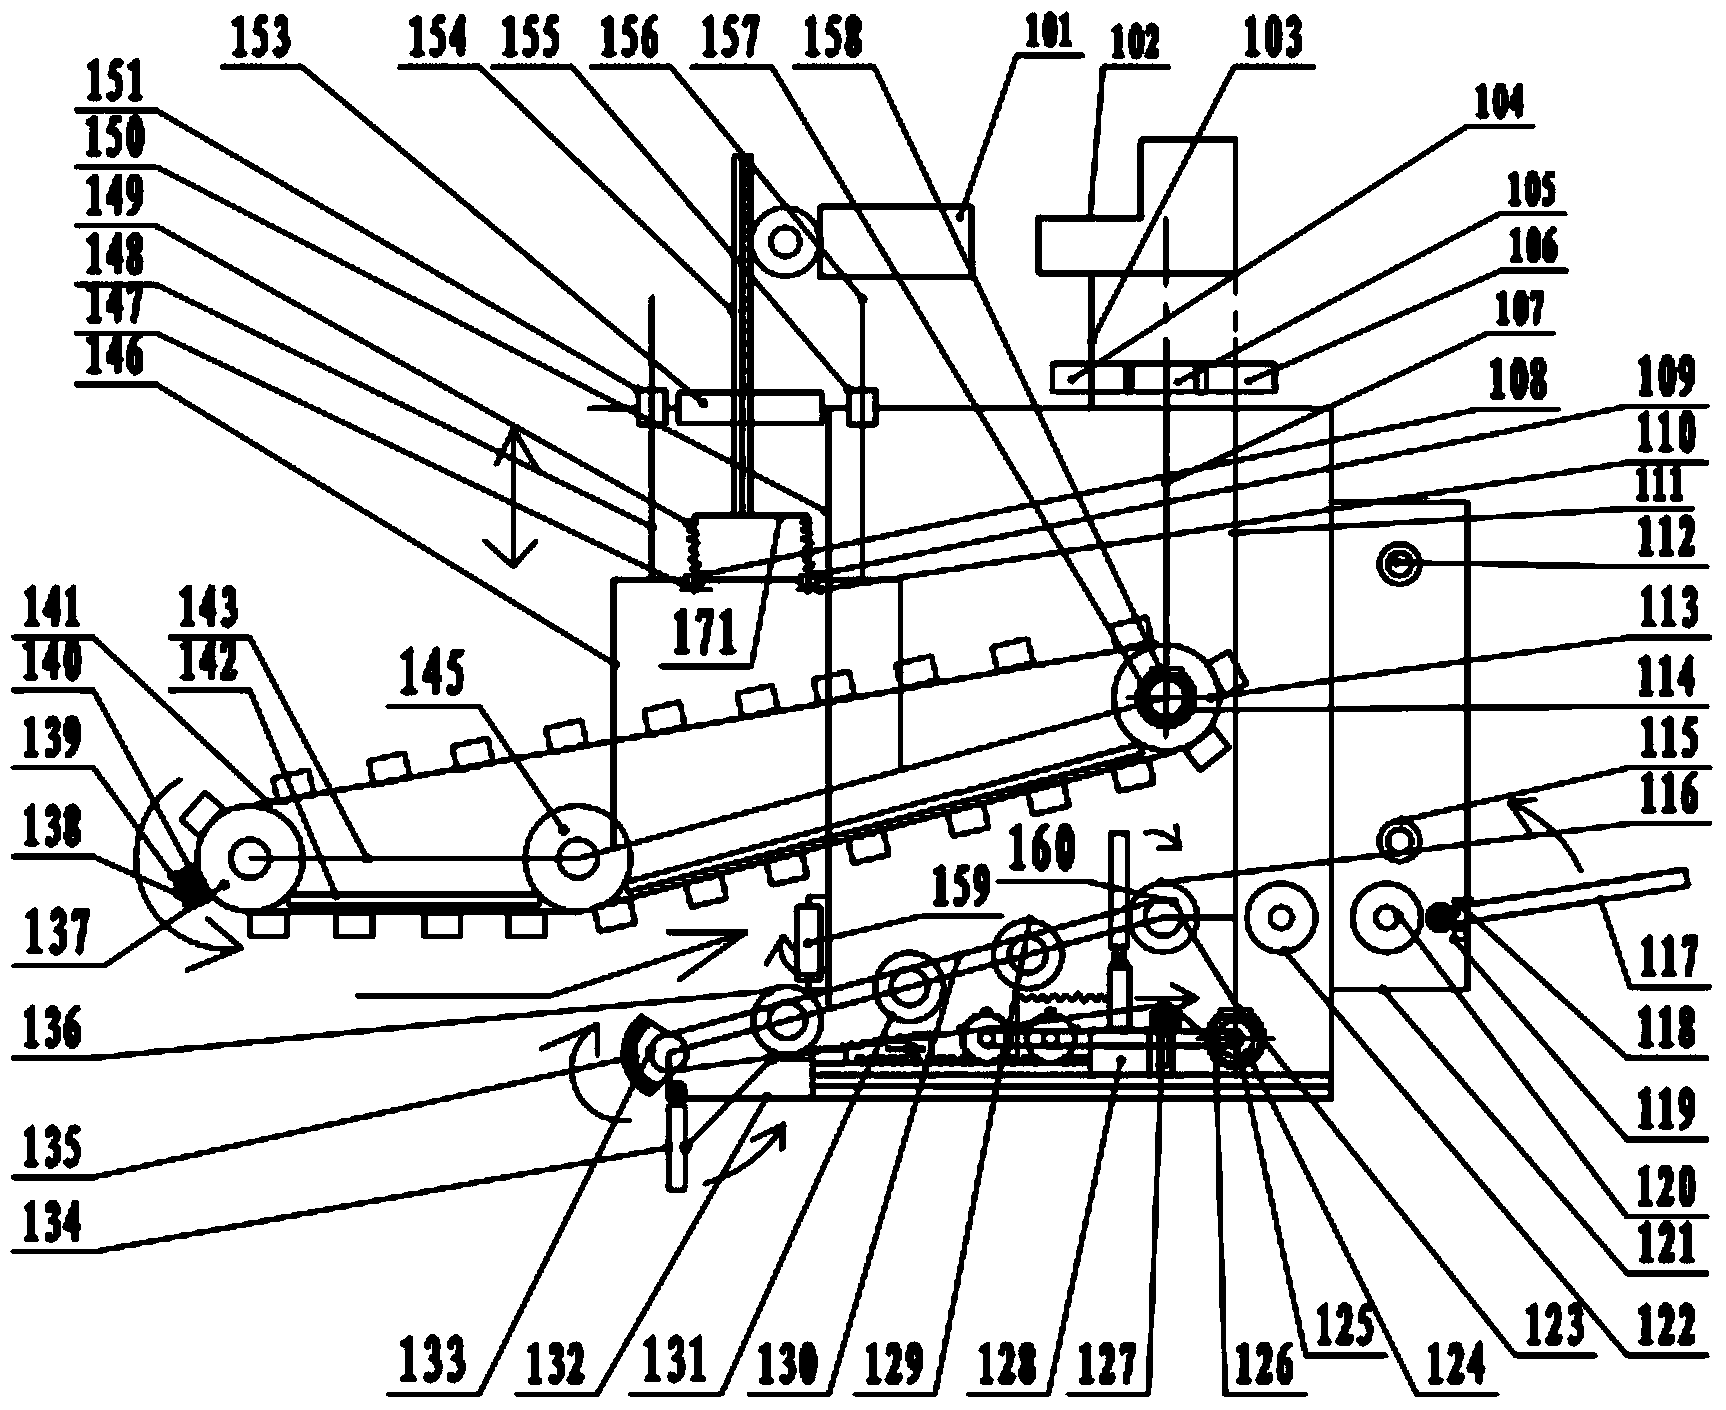 Self-propelled bagged cargo stacking and unstacking track loader